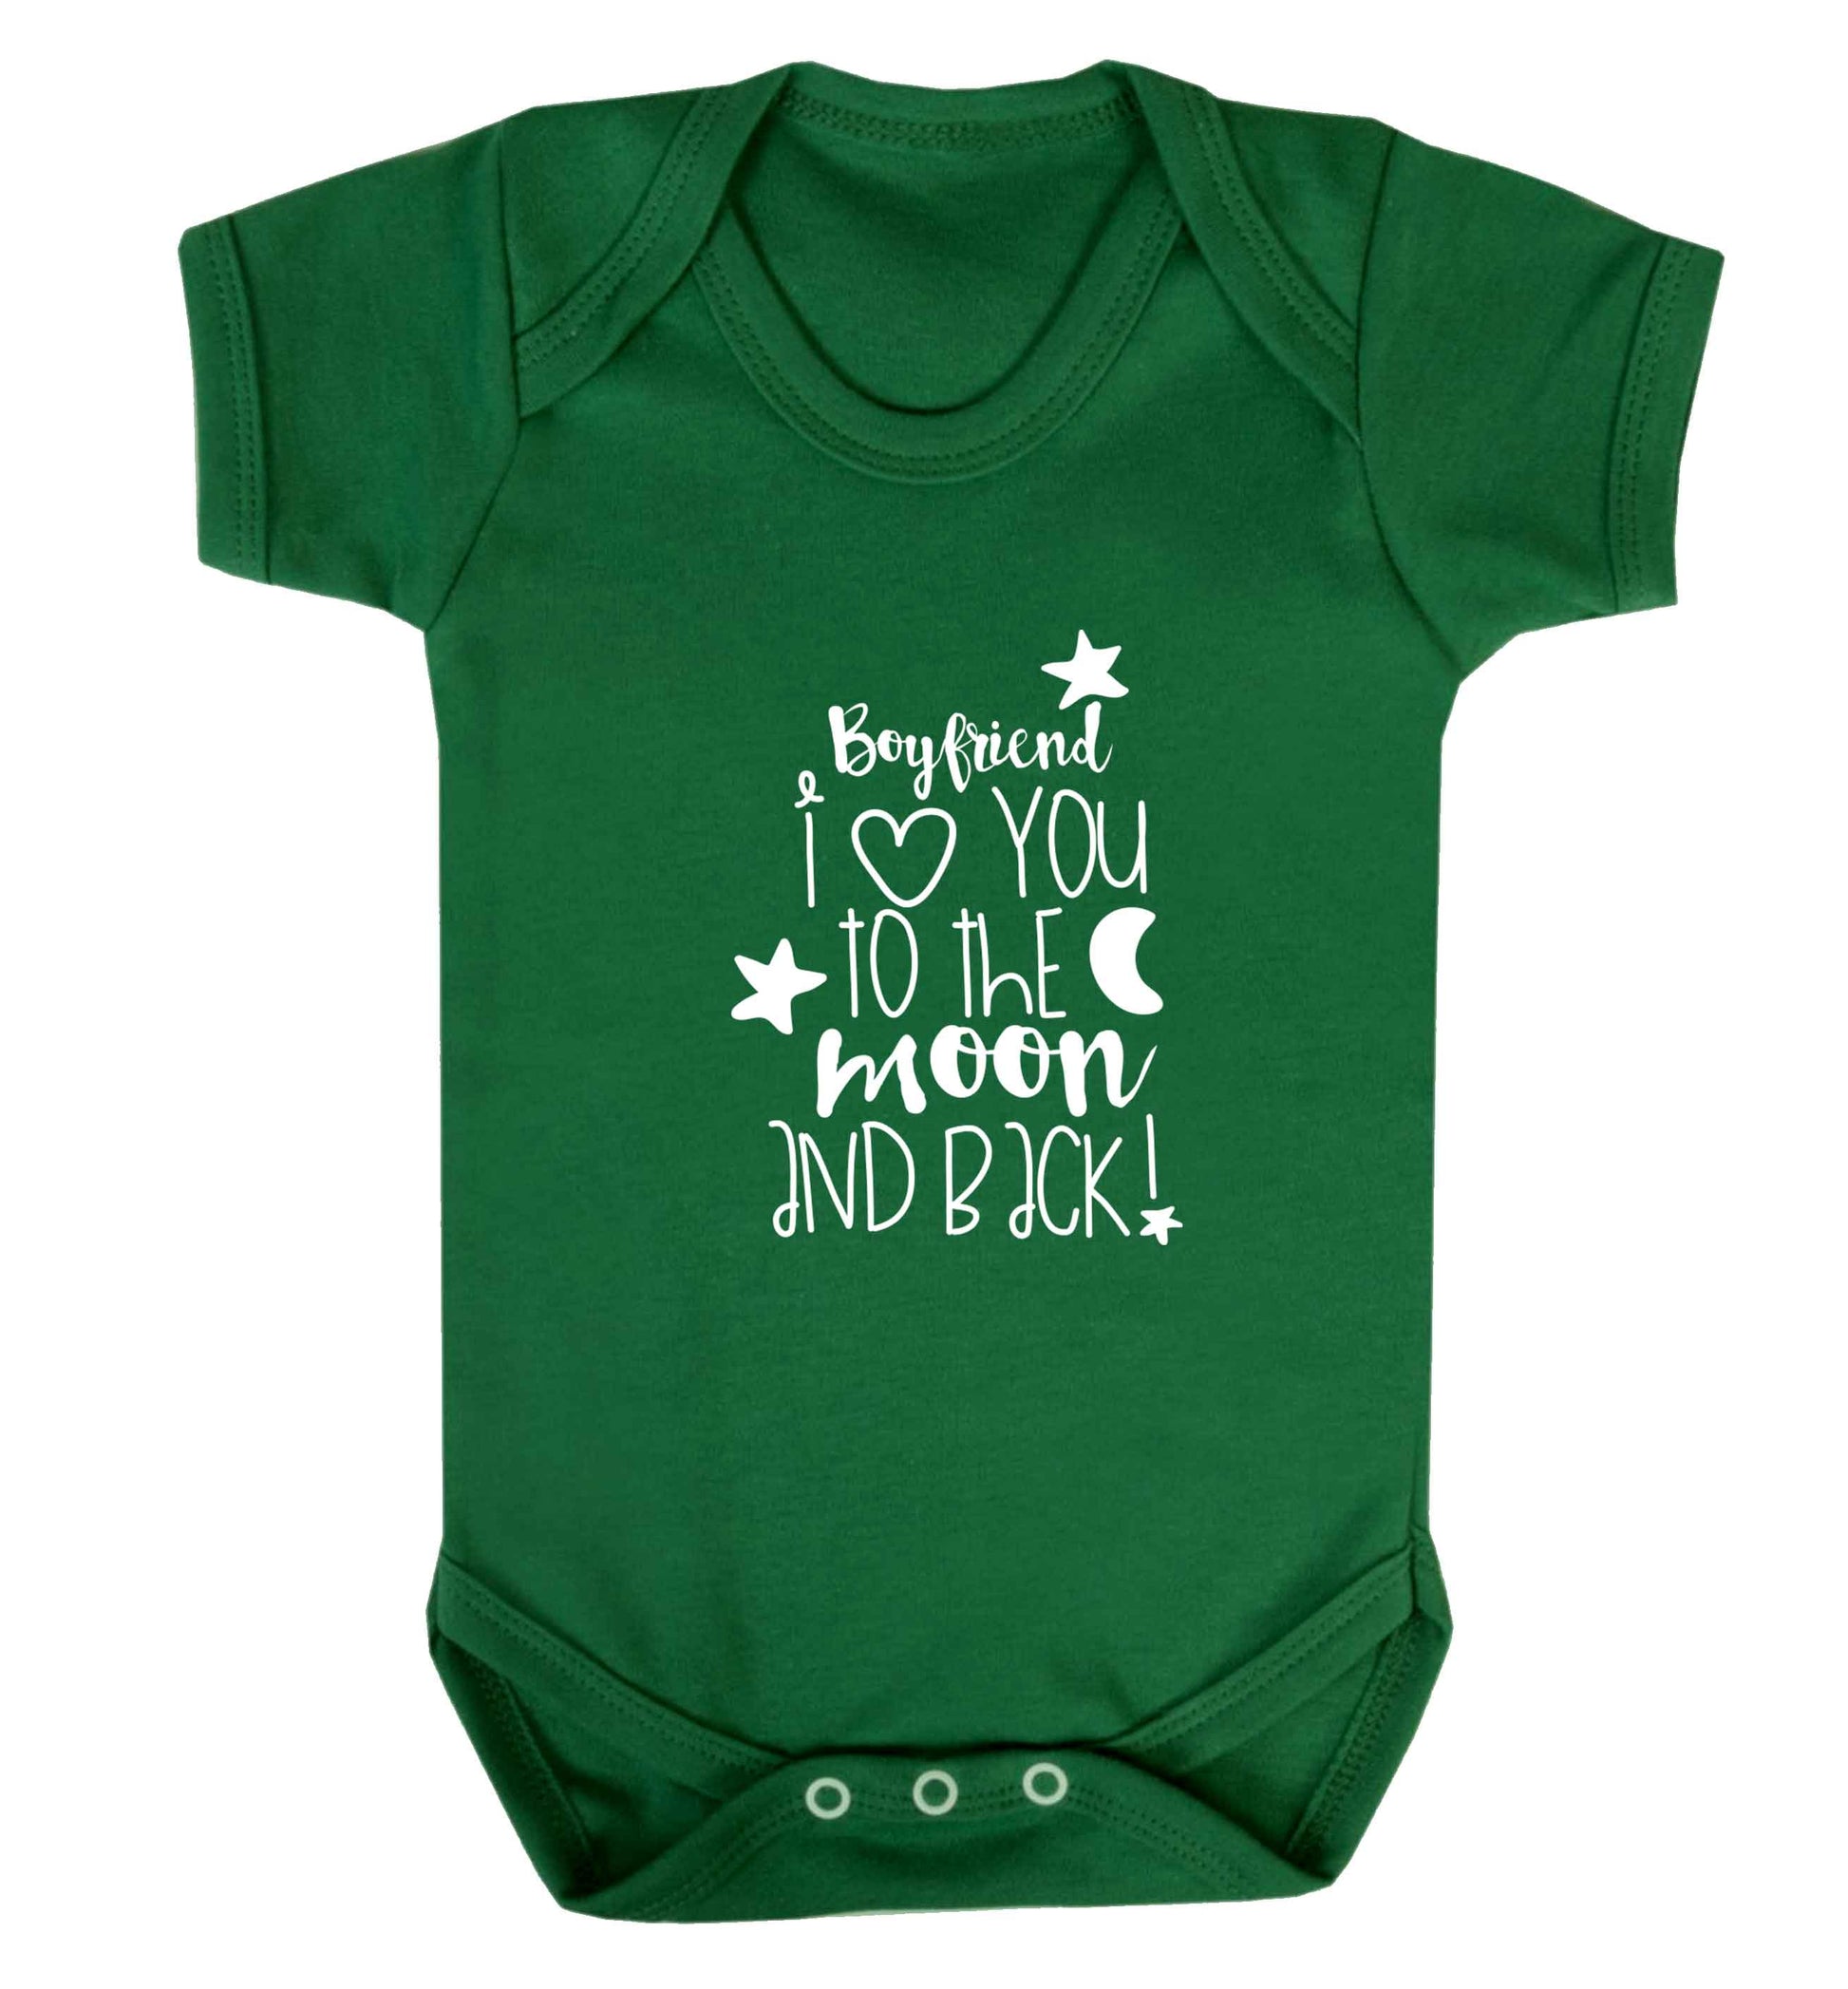 Boyfriend I love you to the moon and back baby vest green 18-24 months